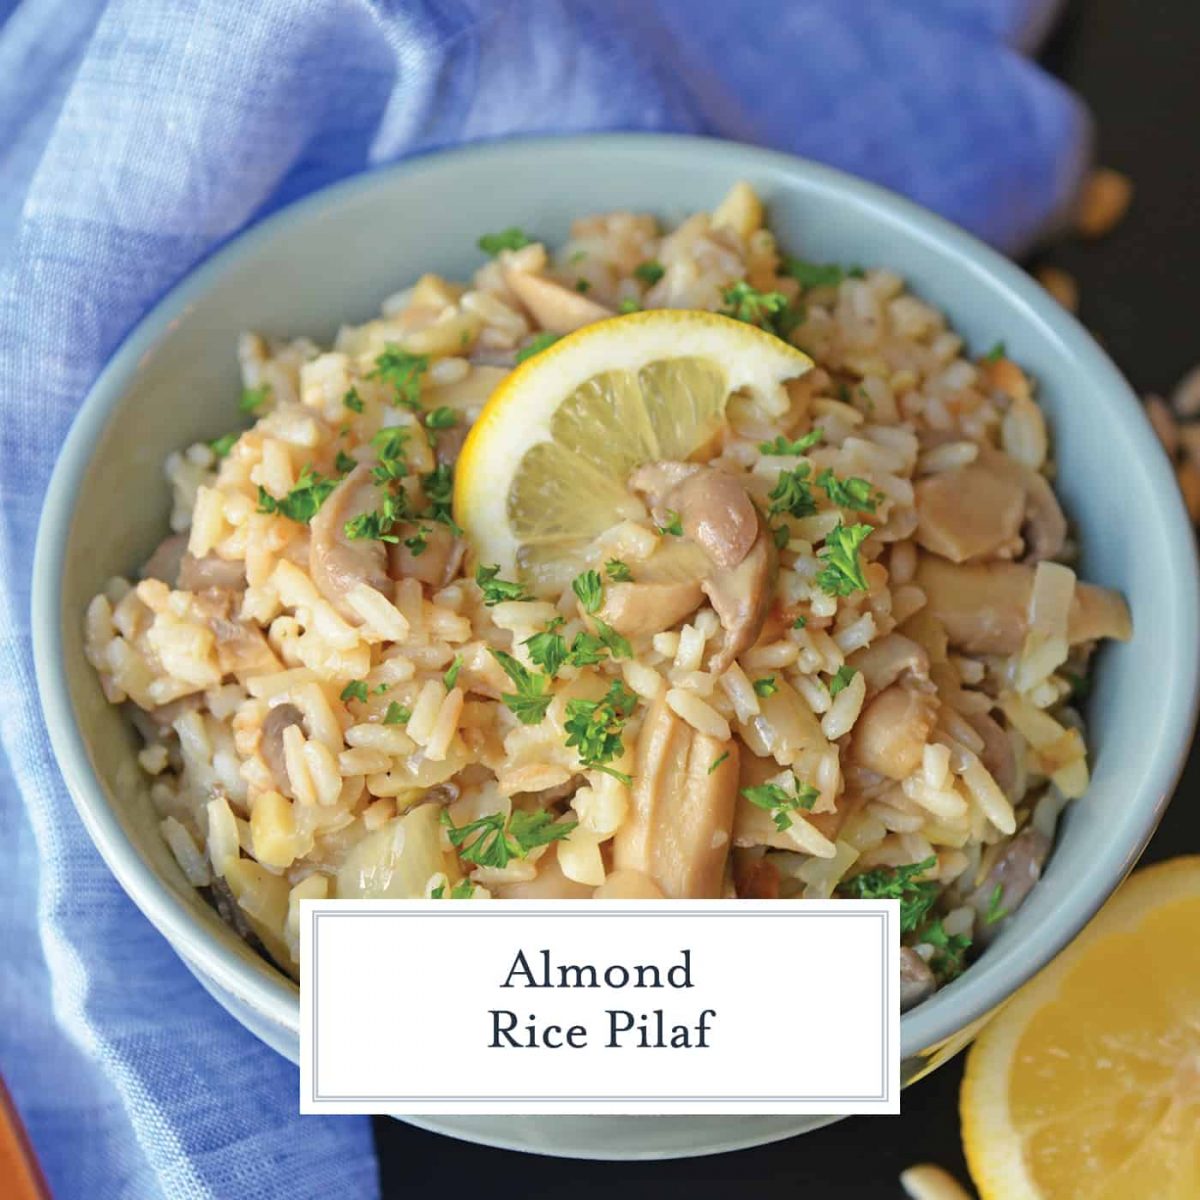 Almond Rice Pilaf is an easy side dish made with crunchy almonds, mushrooms and savory chicken broth and lemon juice to give it loads of flavor! An easy rice recipe the whole family will love. #ricepilafrecipe #easysidedish www.savoryexperiments.com